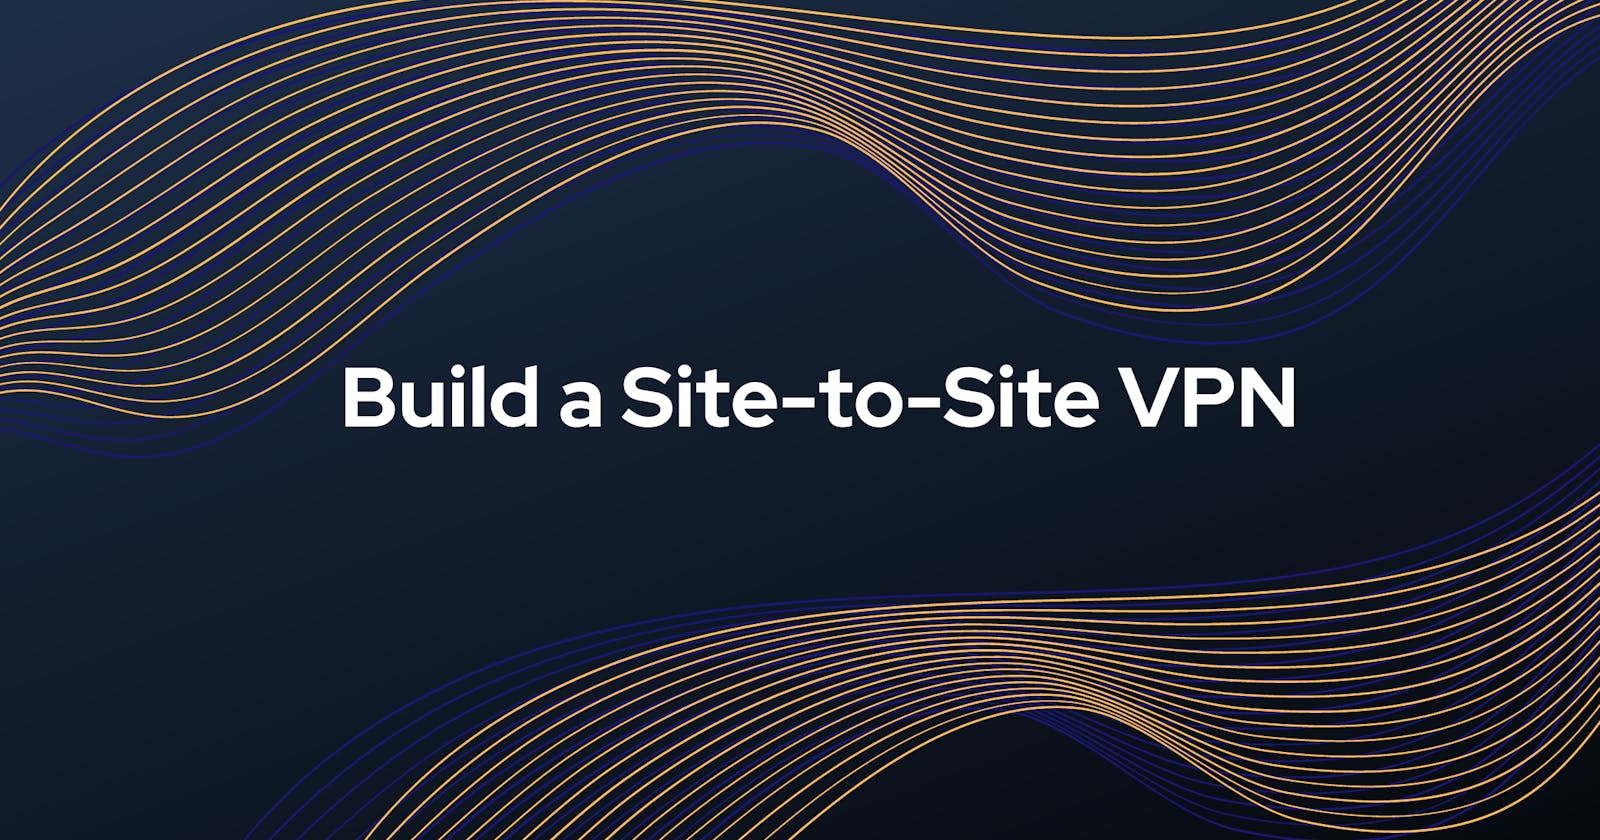 Build a Site-to-Site VPN from AWS to the Customer